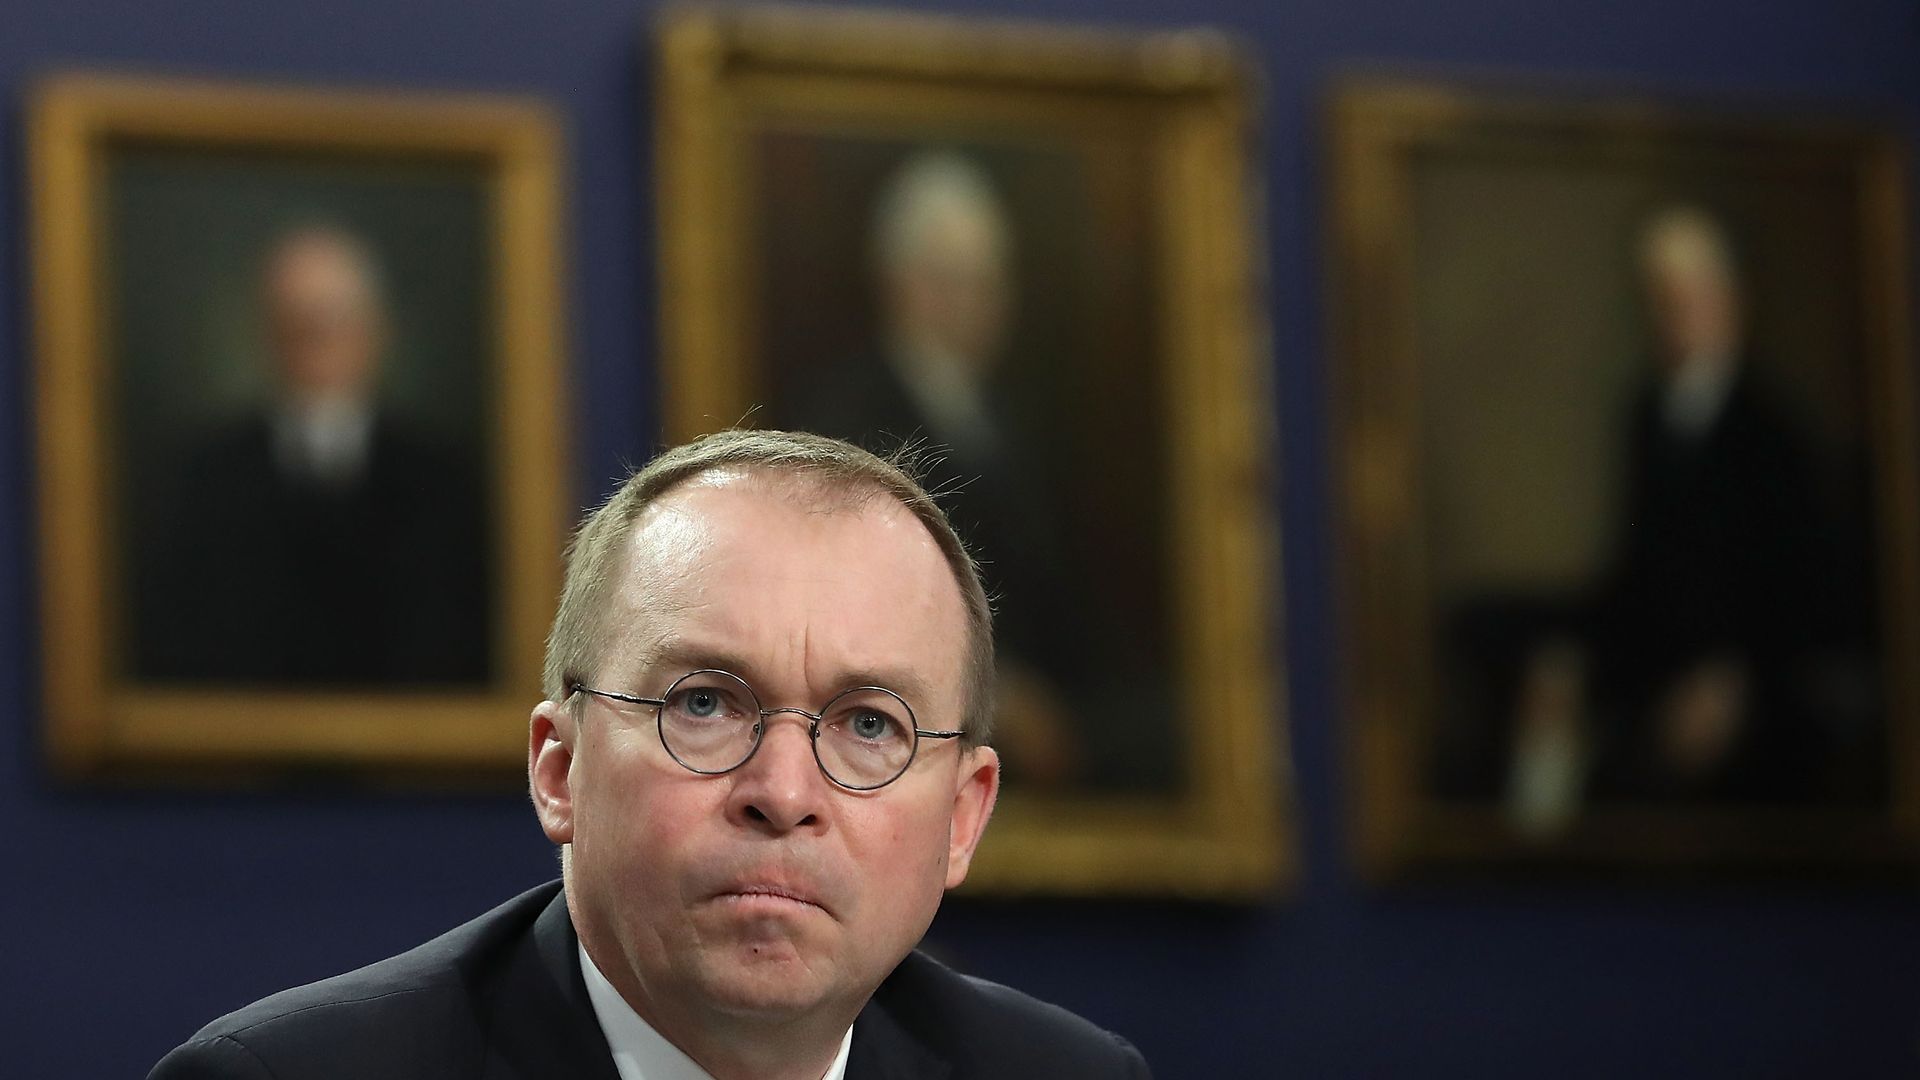 Mick Mulvaney looking straight at the camera with an unhappy look on his face